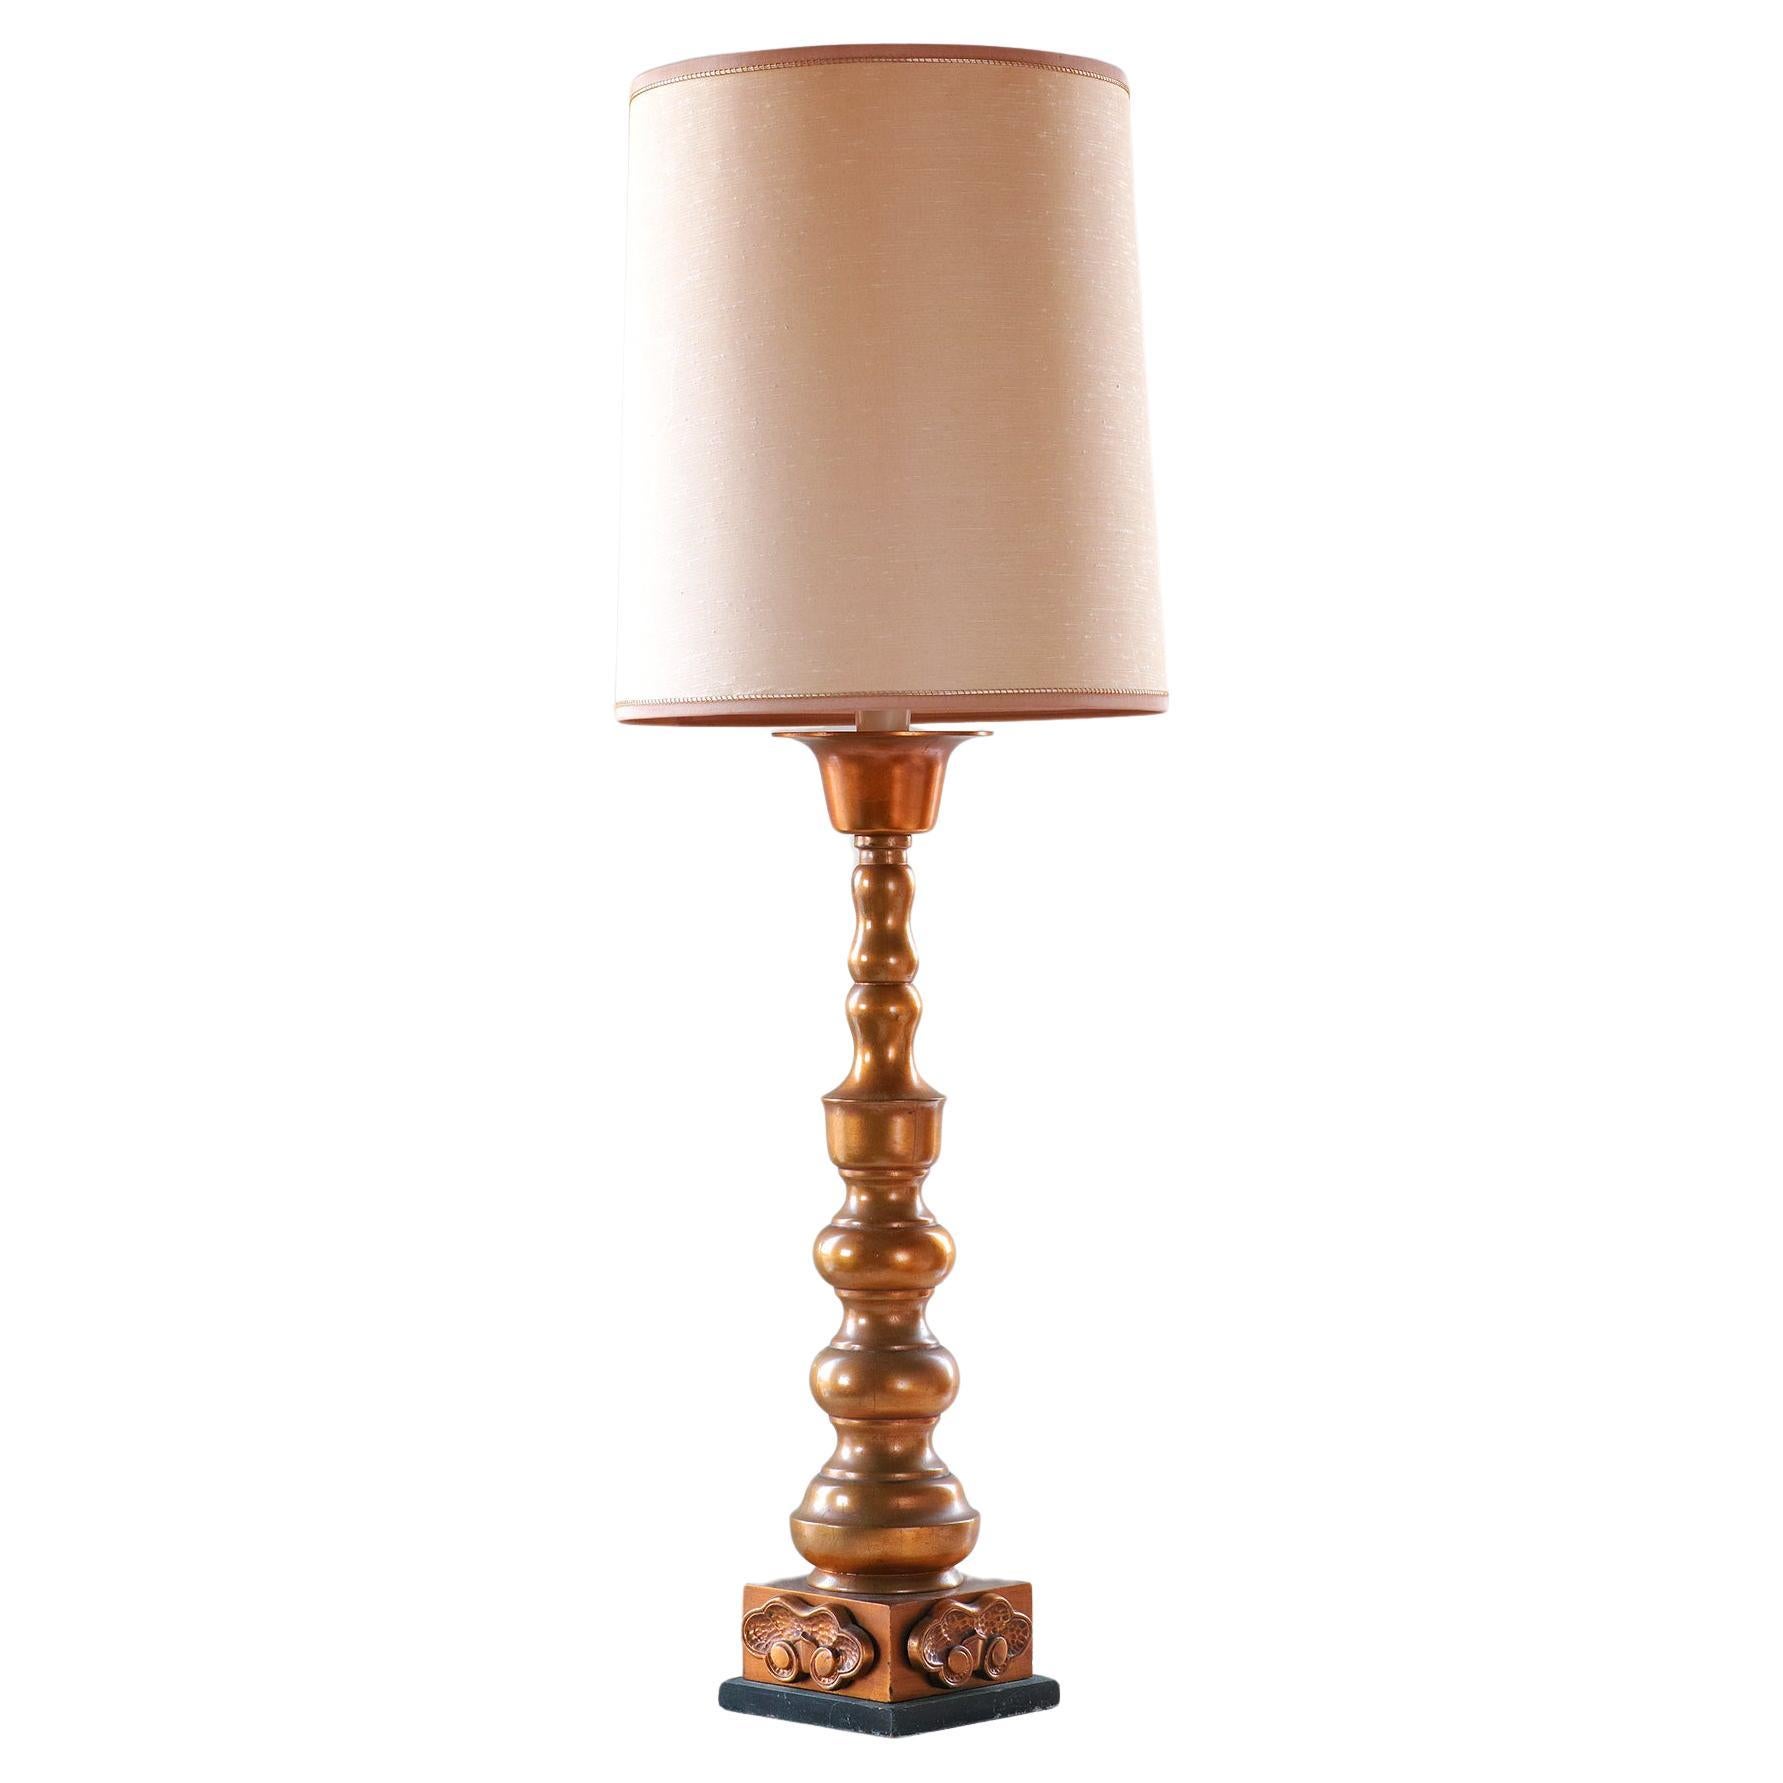 What is the history of Marbro lamps?